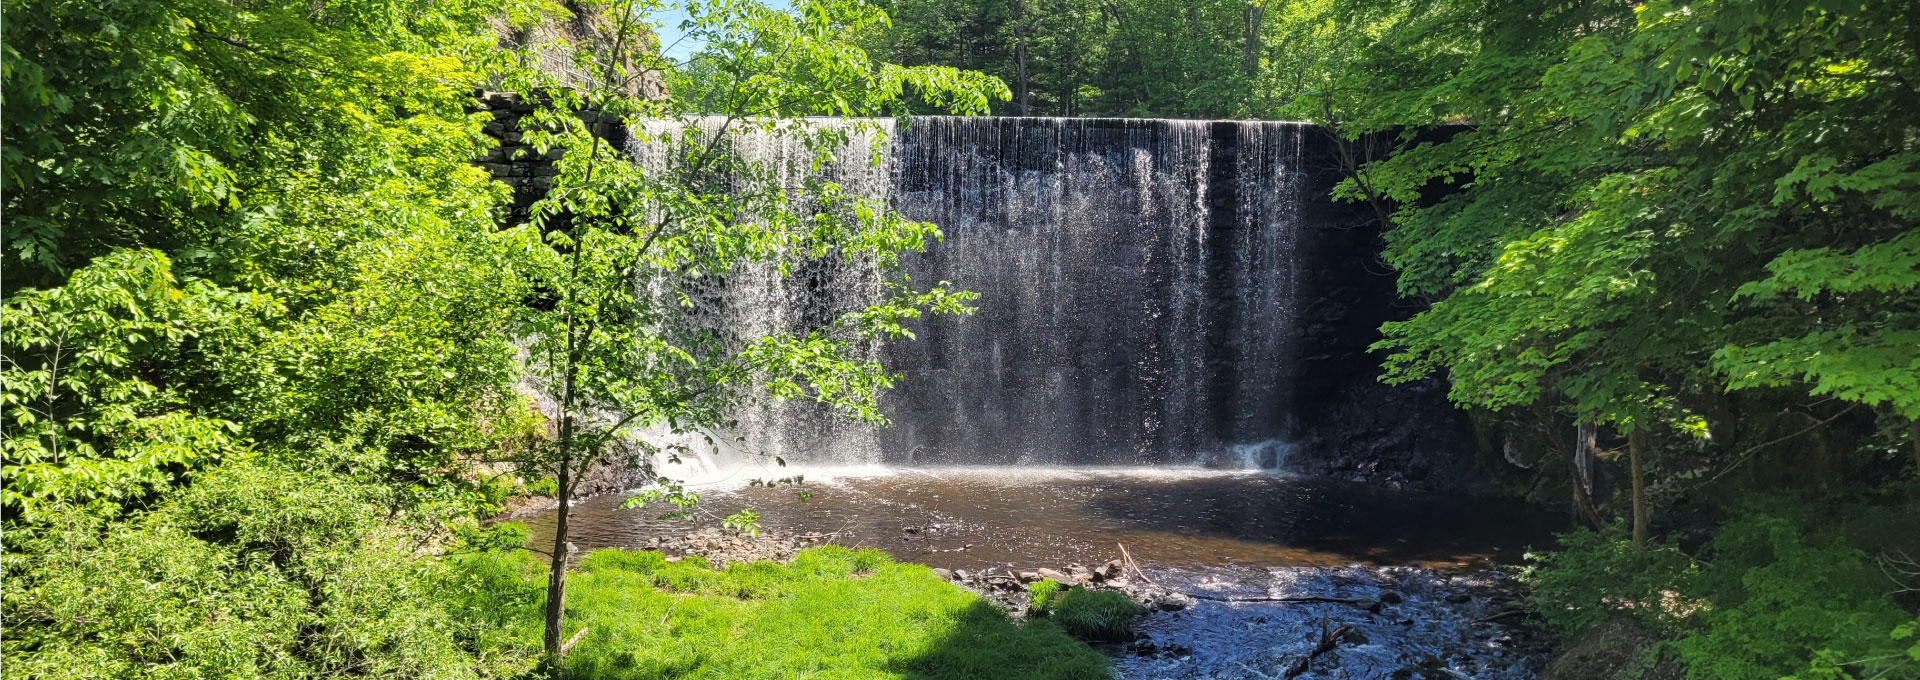 Waterfall at Puffers Pond